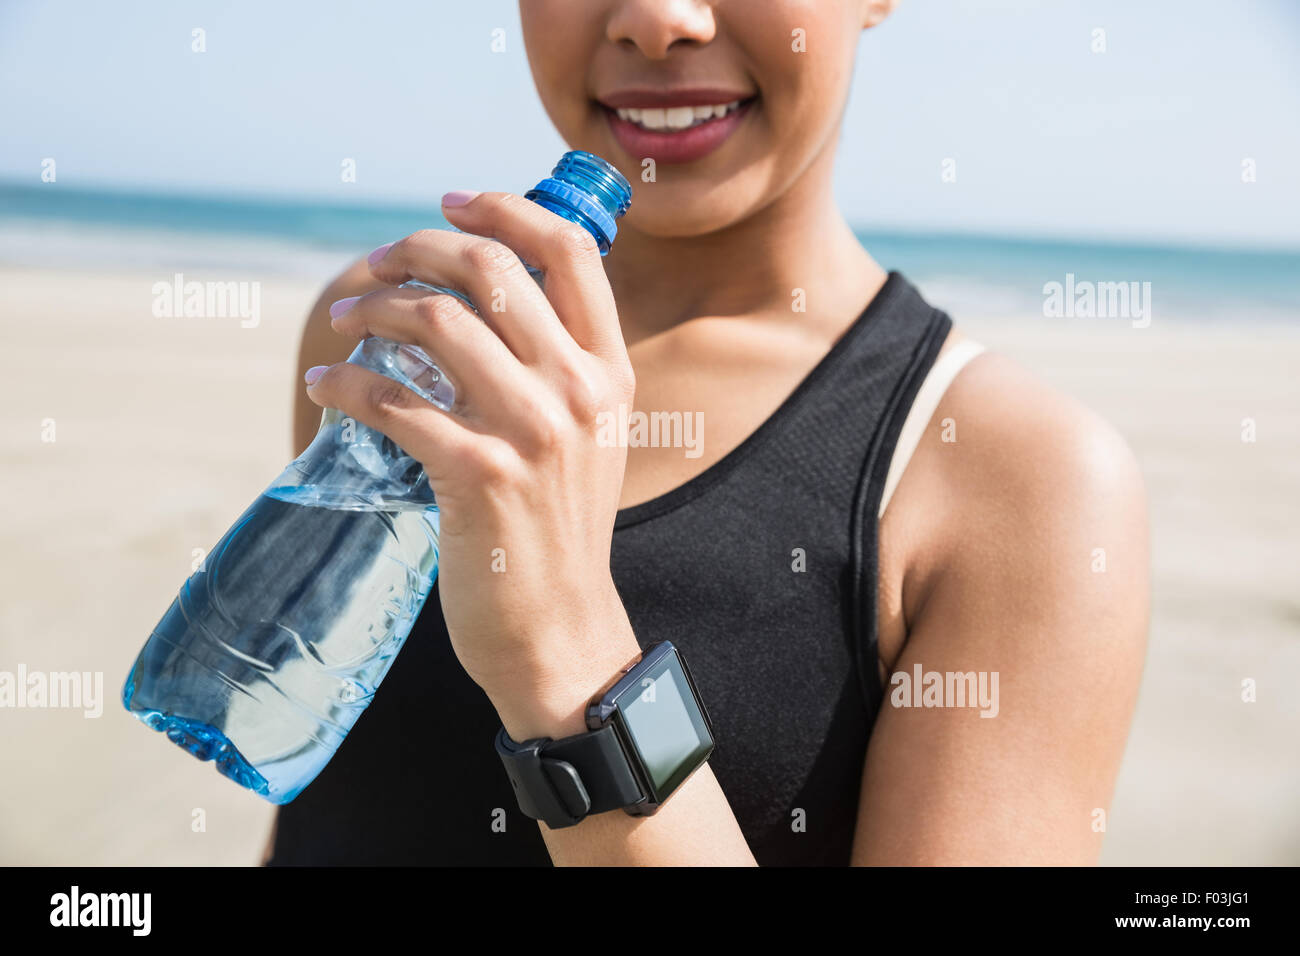 Fit woman wearing smart watch Banque D'Images